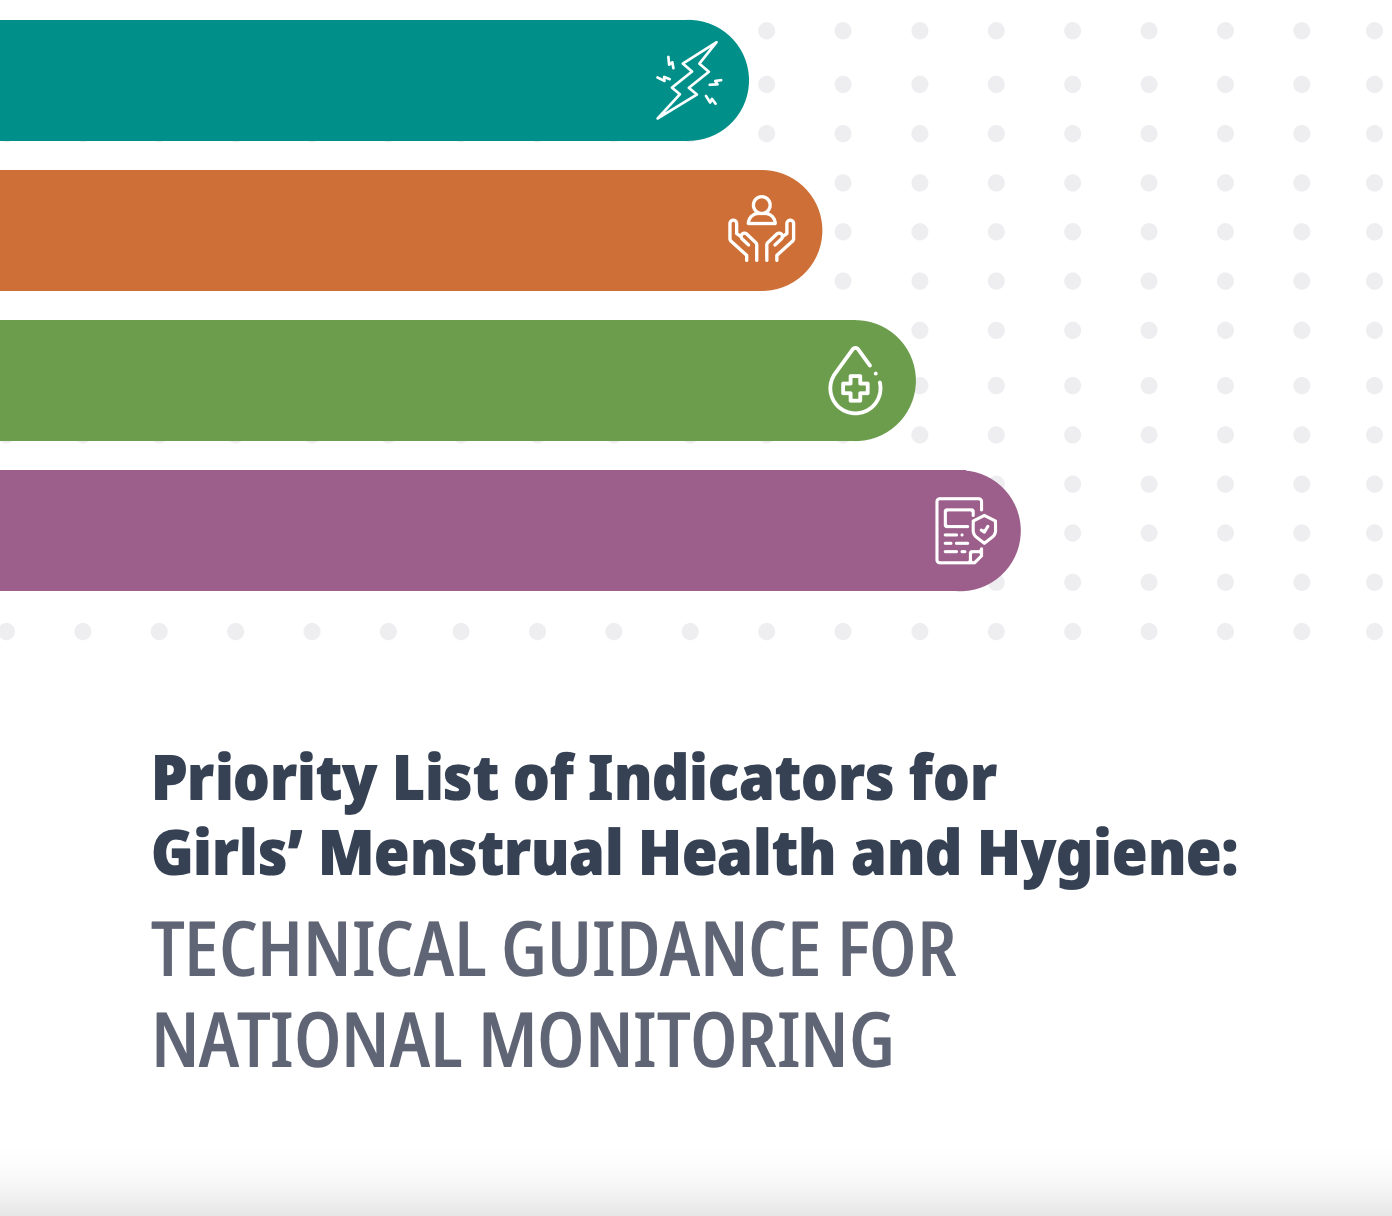 Priority List of Indicators for Girls’ Menstrual Health and Hygiene: Technical Guidance for National Monitoring